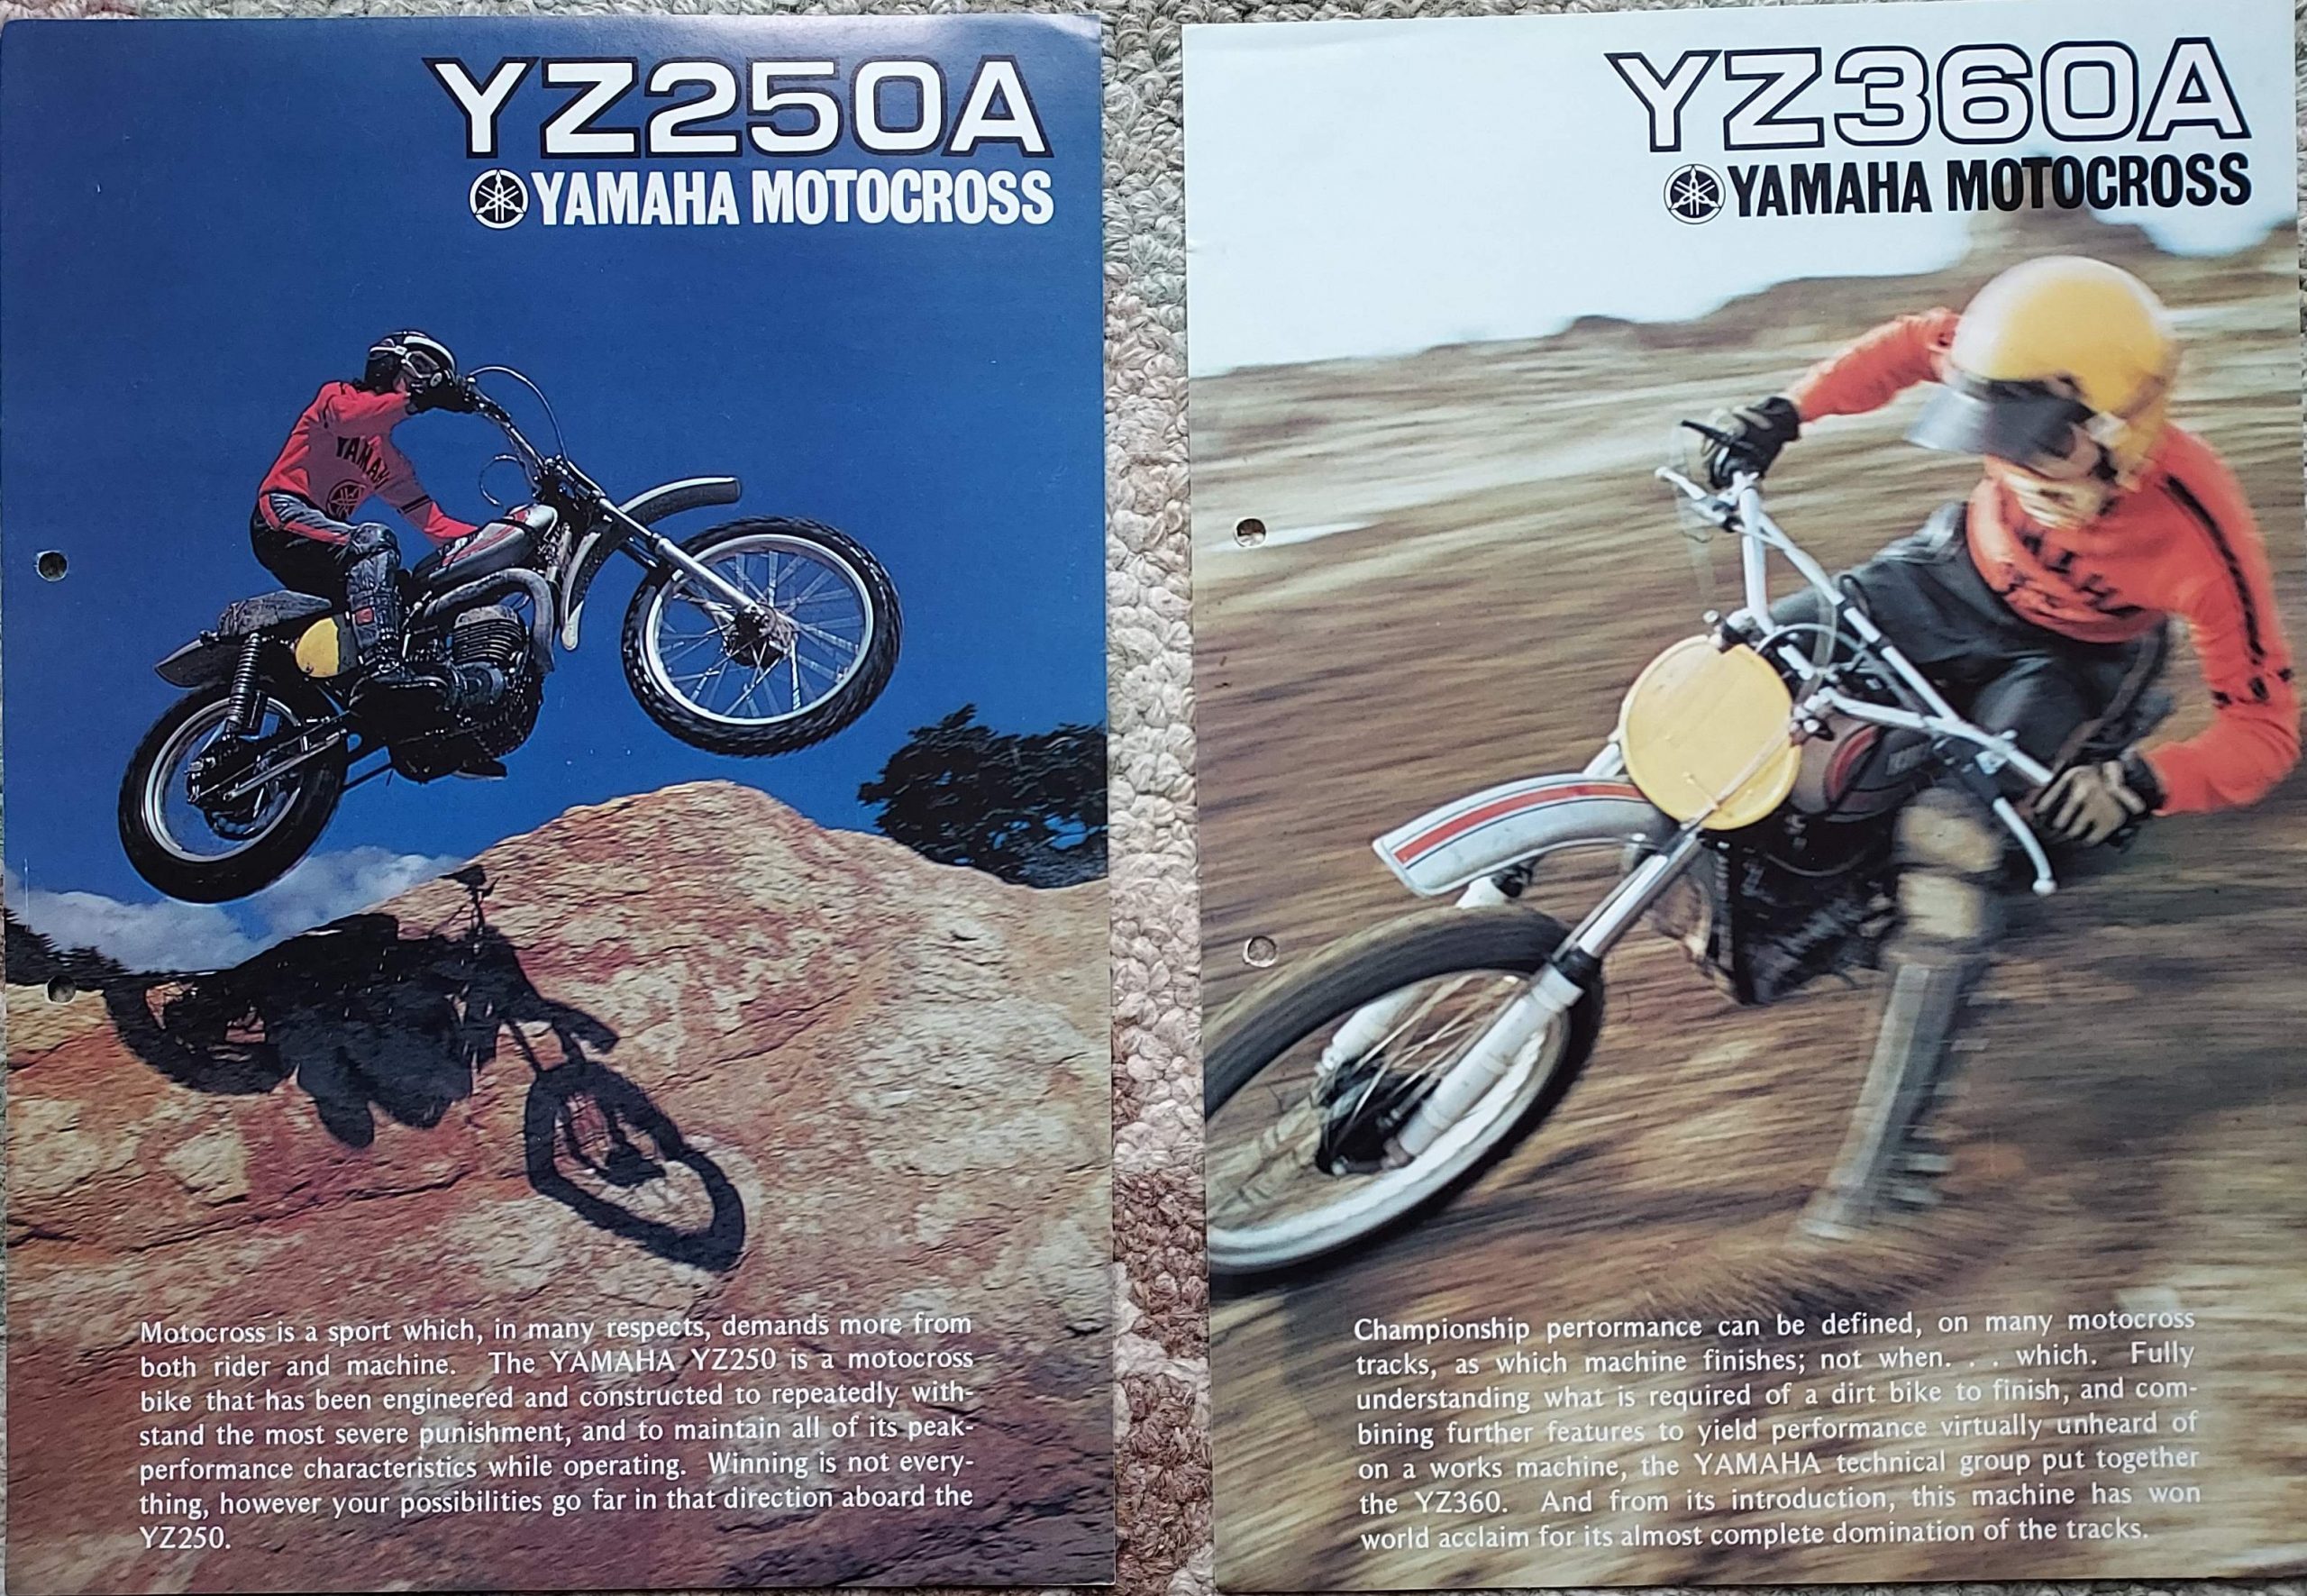 Read all about it: The rise of the £450 bike brochure collectors are going wild for